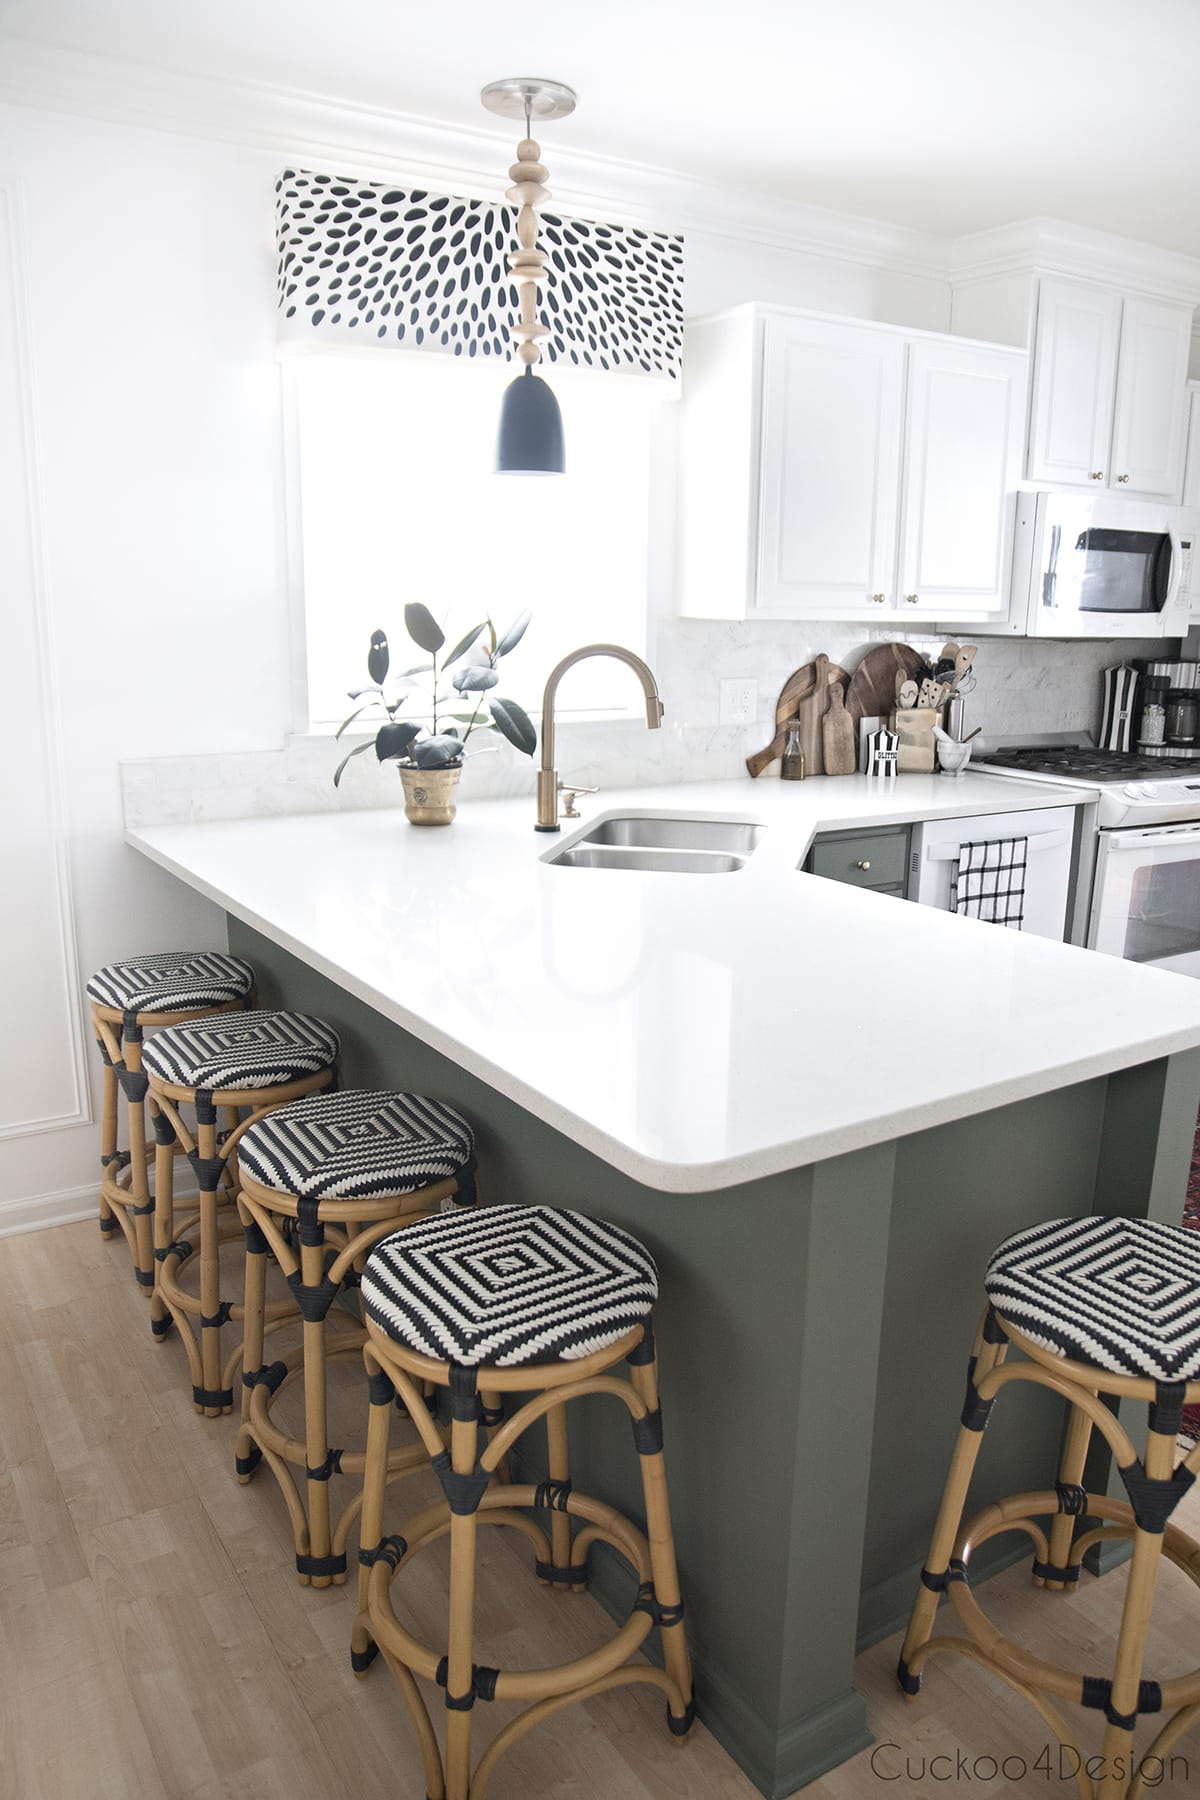 Turning my white laminate builder grade kitchen into a green and white two-toned kitchen